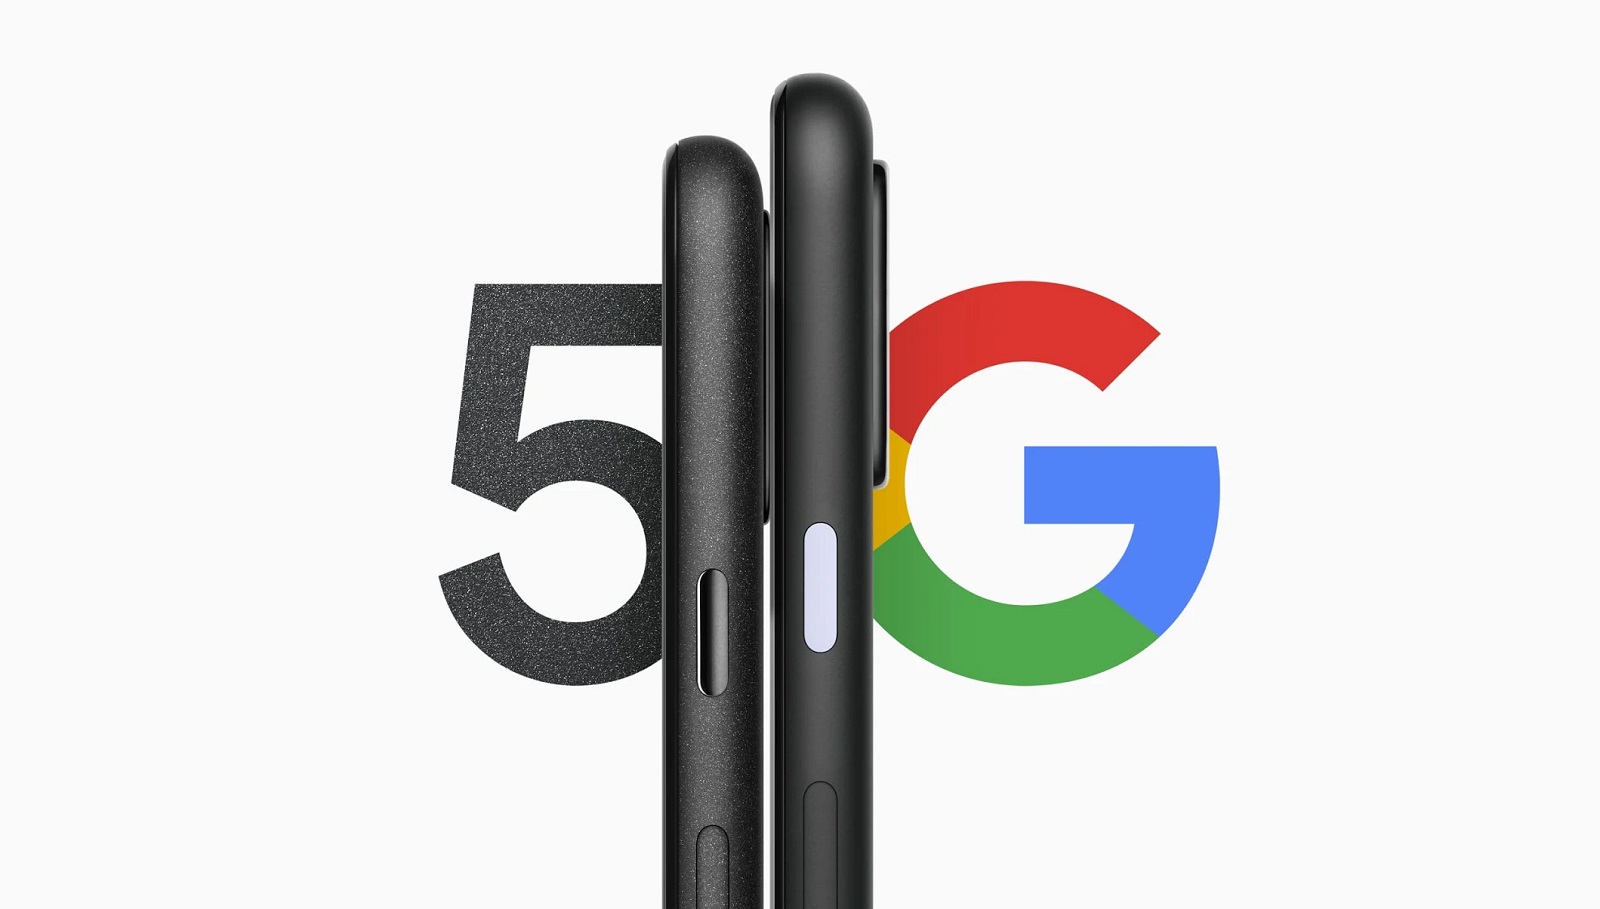 Google might power its Pixel 5a 5G with a Snapdragon 765G SoC